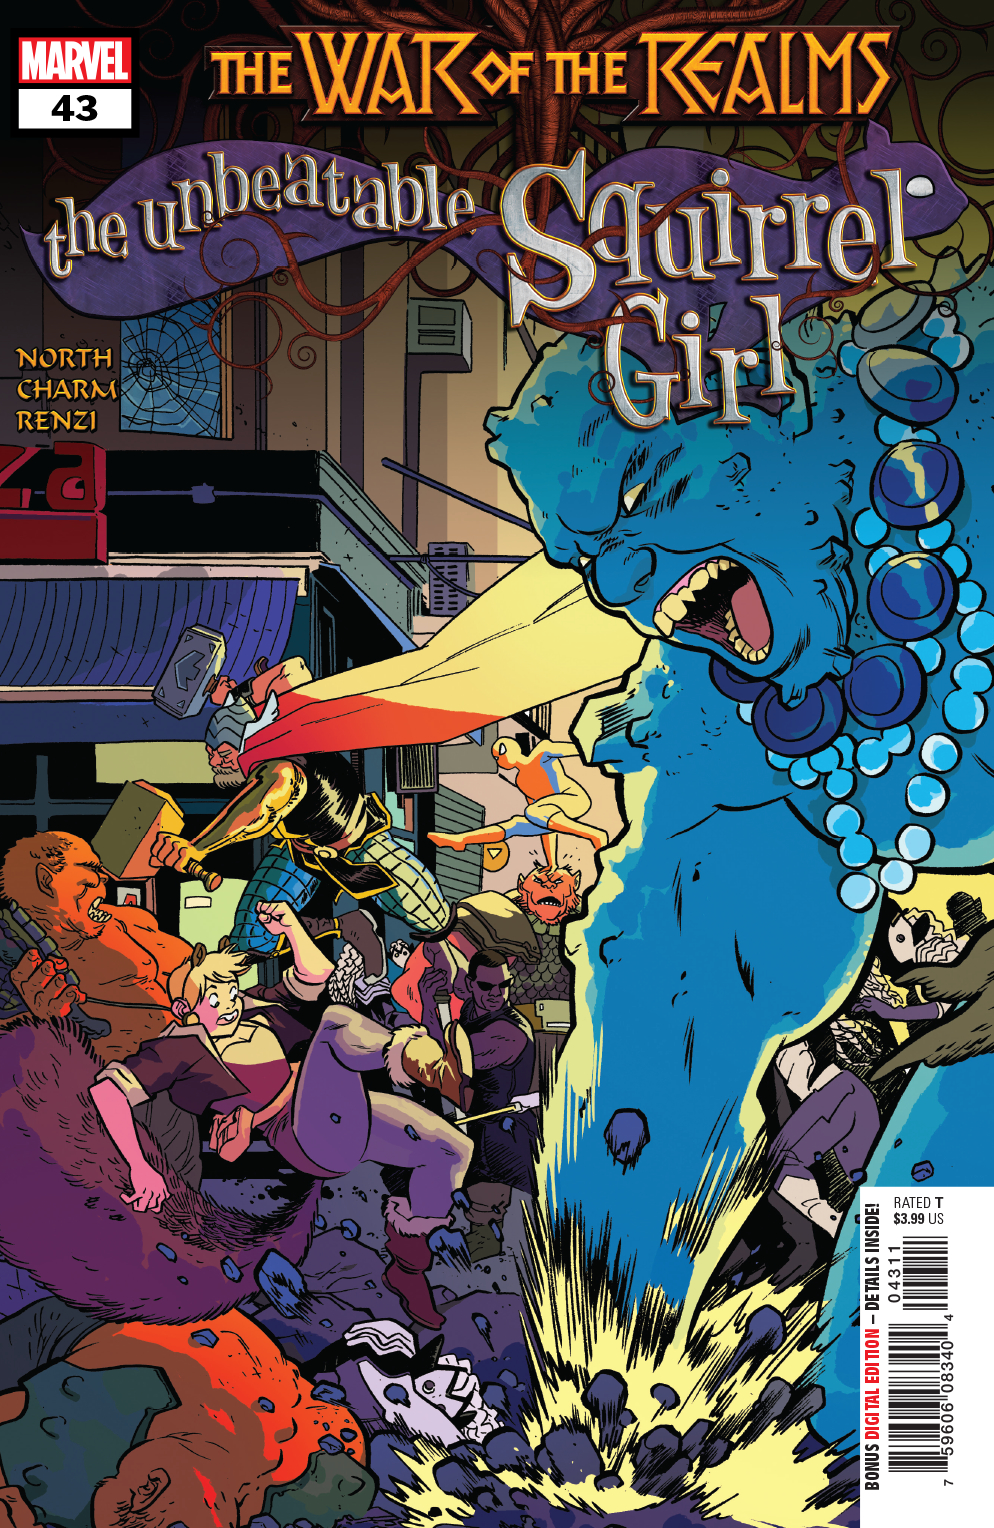 Unbeatable Squirrel Girl no. 43 (2015 2nd Series)